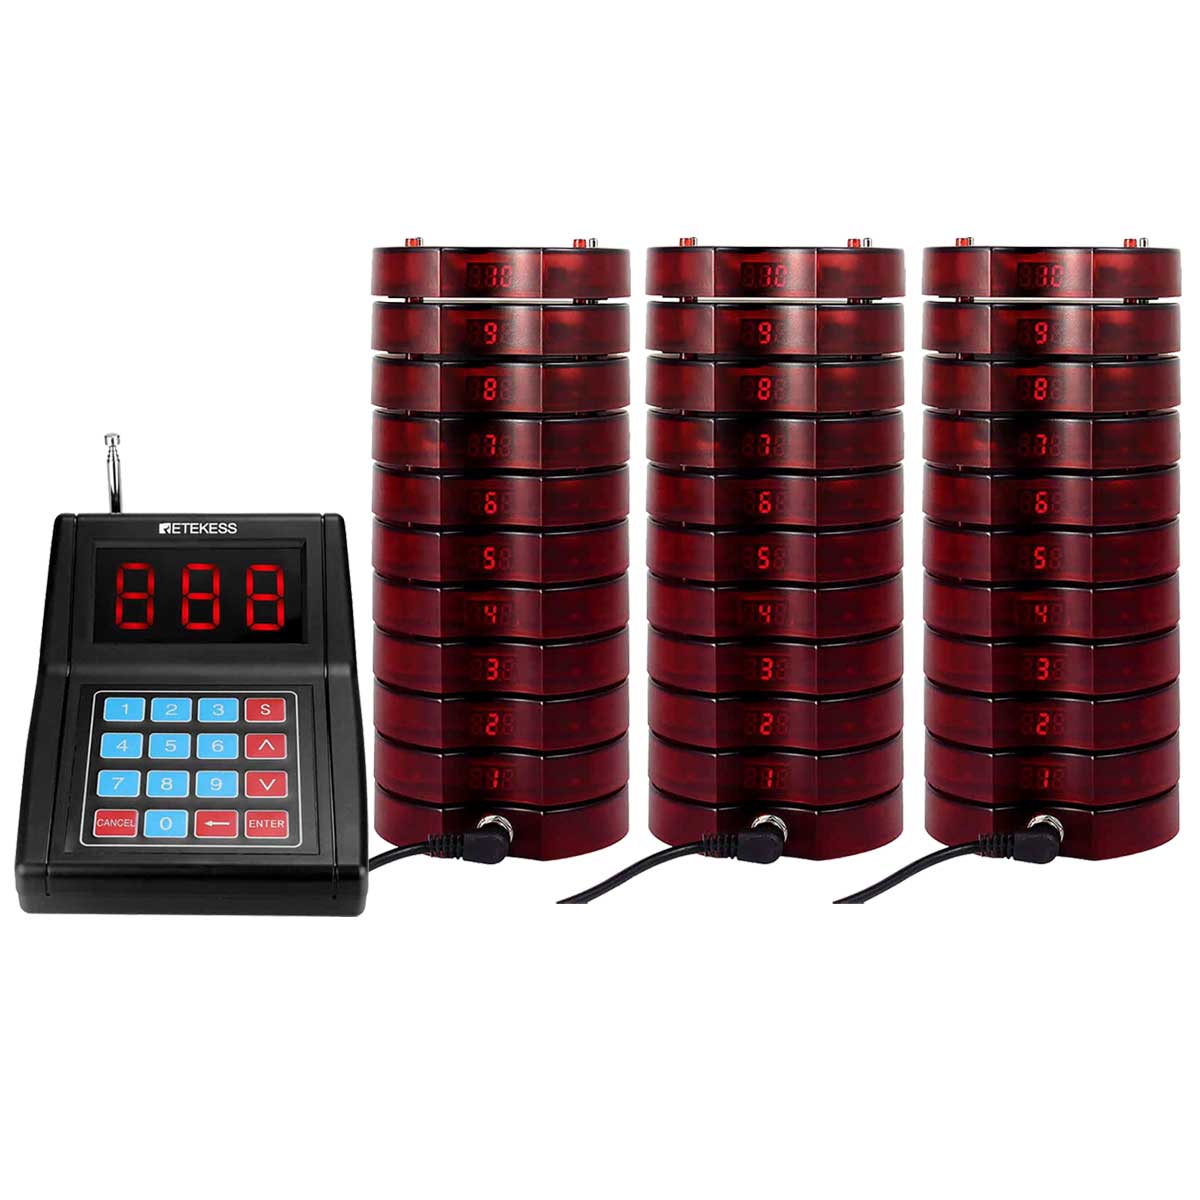 Retekess TD165 Restaurant Pager System, 1 Keypad 30 Pagers Red